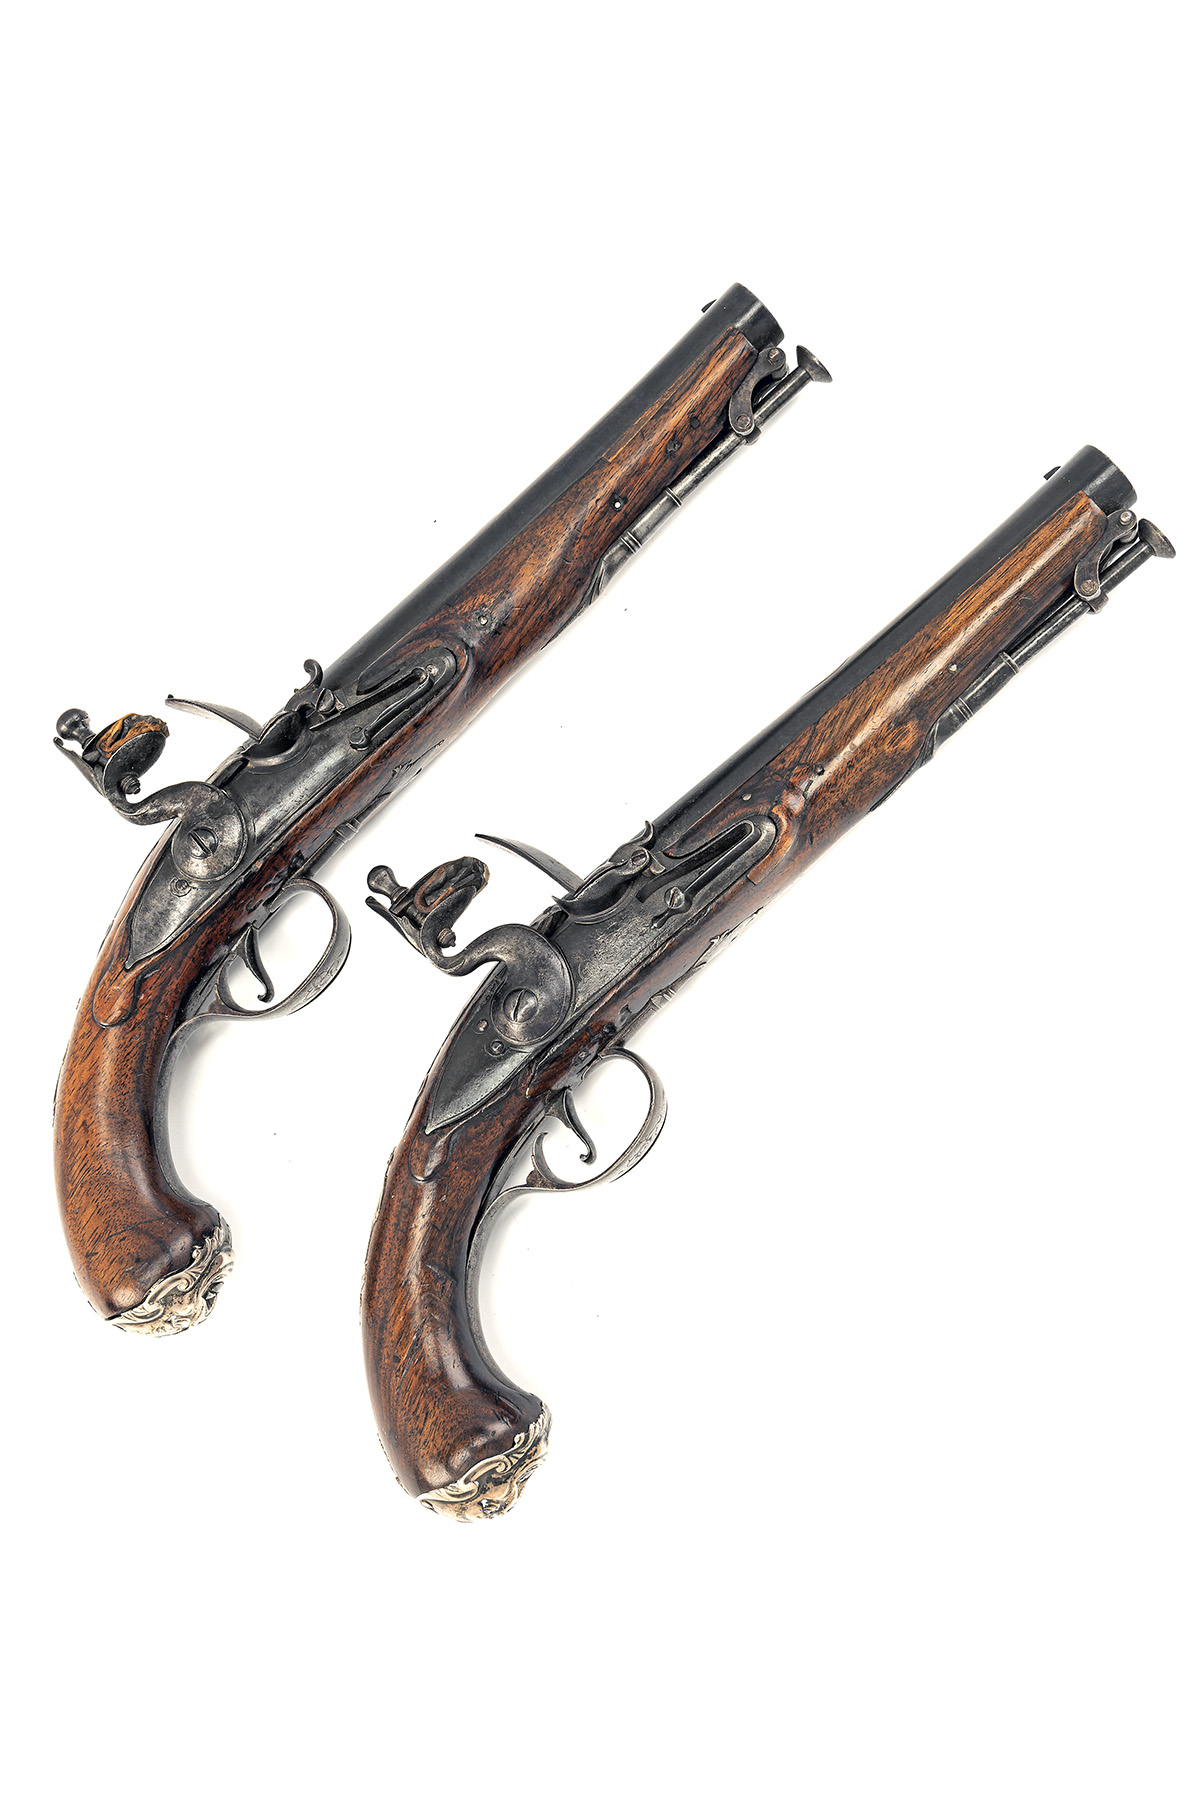 A PAIR OF SILVER-MOUNTED 22-BORE FLINTLOCK HOLSTER PISTOLS SIGNED GRIFFIN, LONDON, no visible serial